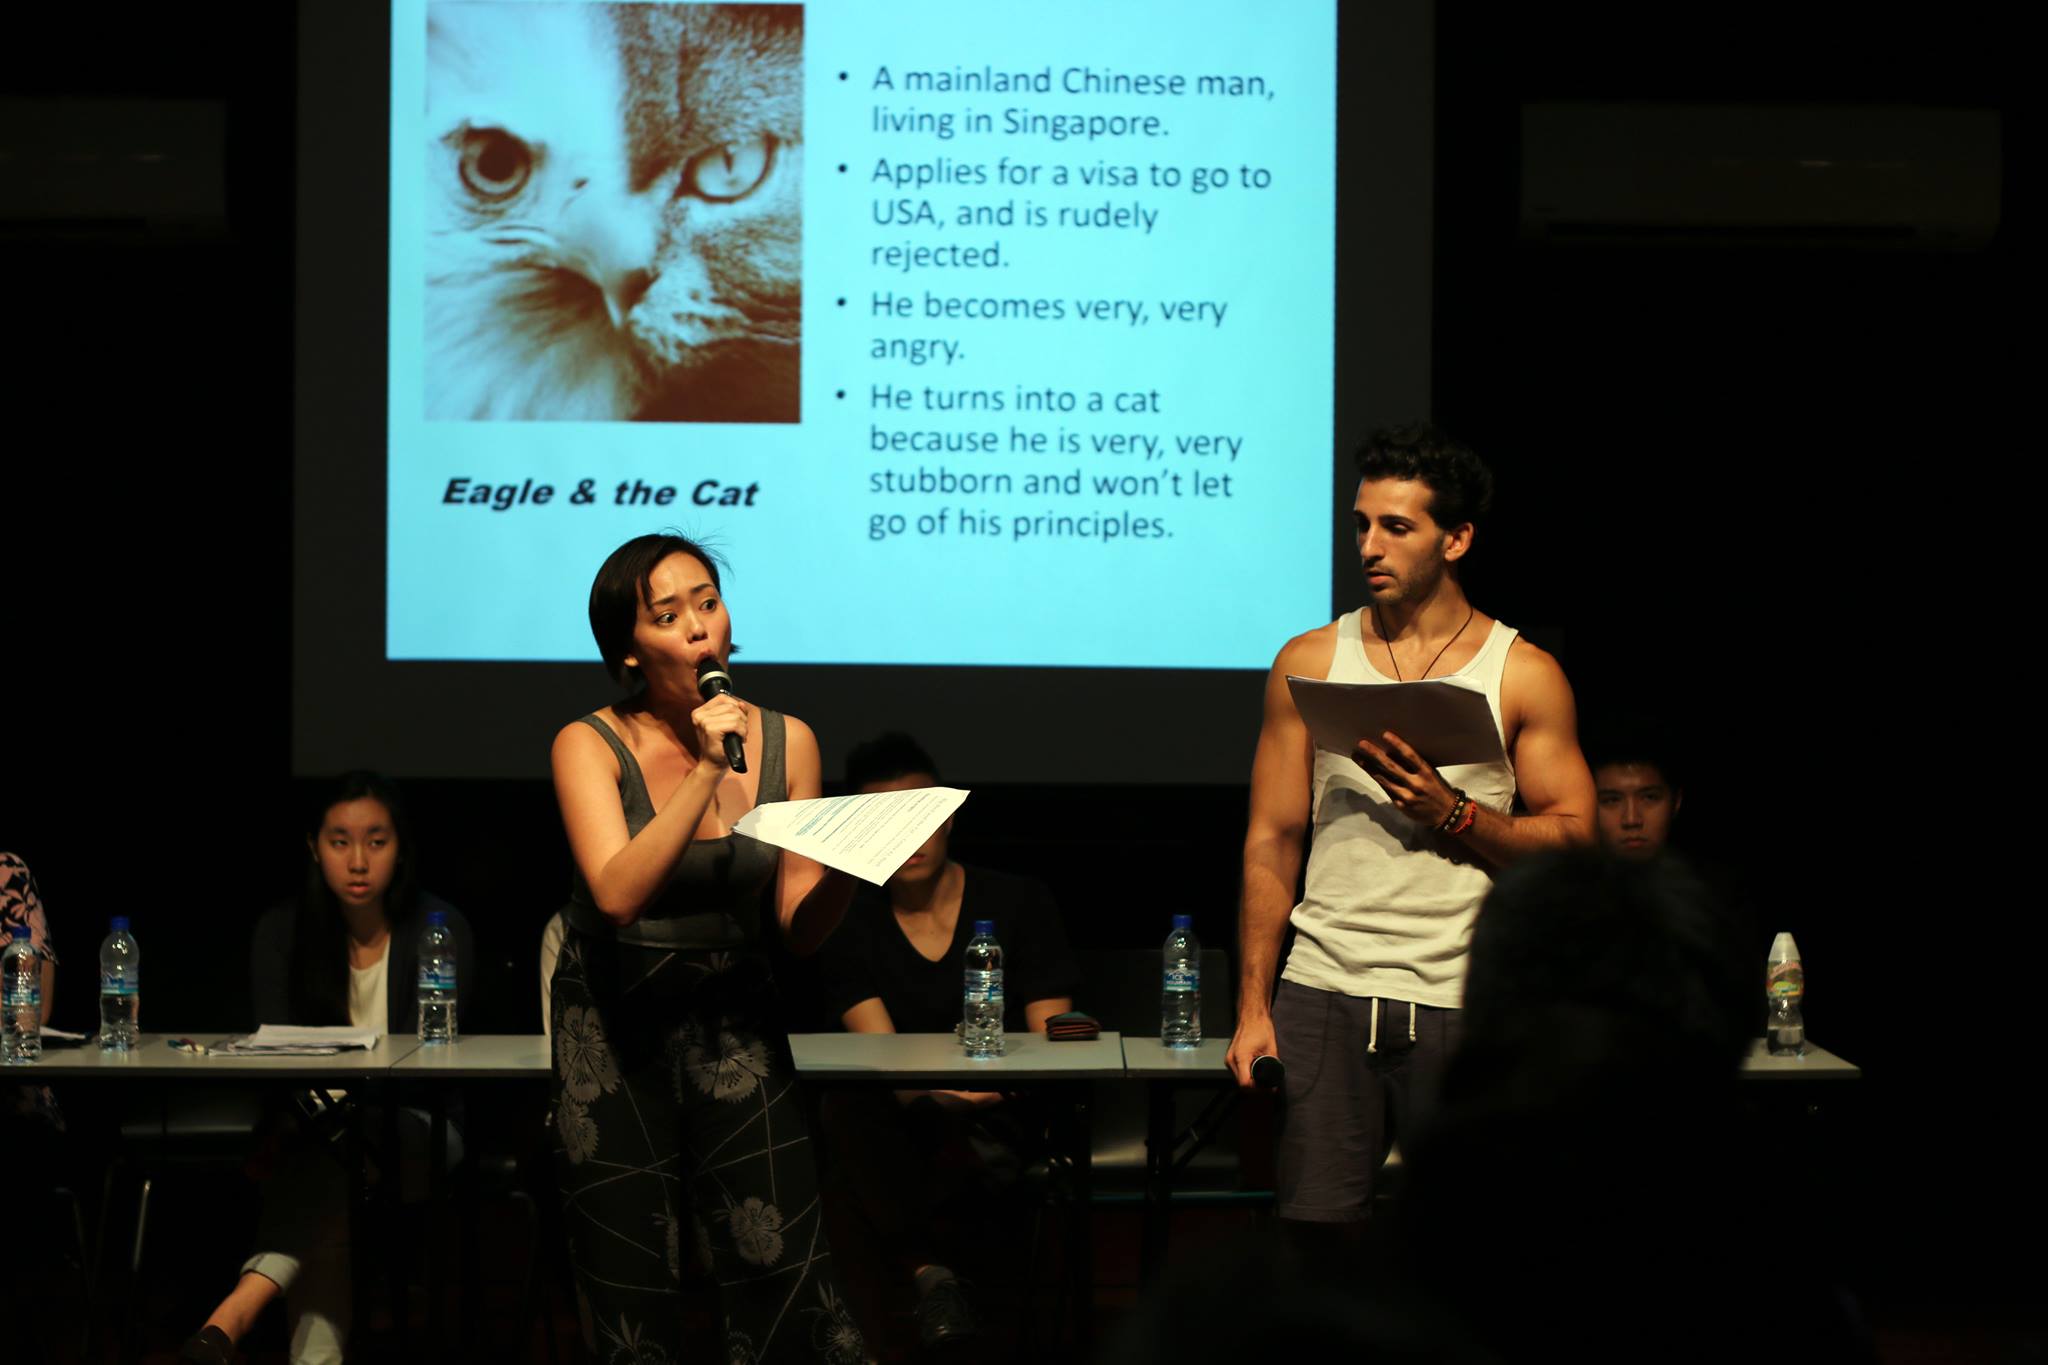 The photograph is of two performers Terri and Nathan performing a short excerpt from "The Eagle and the Cat". There is a projection of a slide in the background.